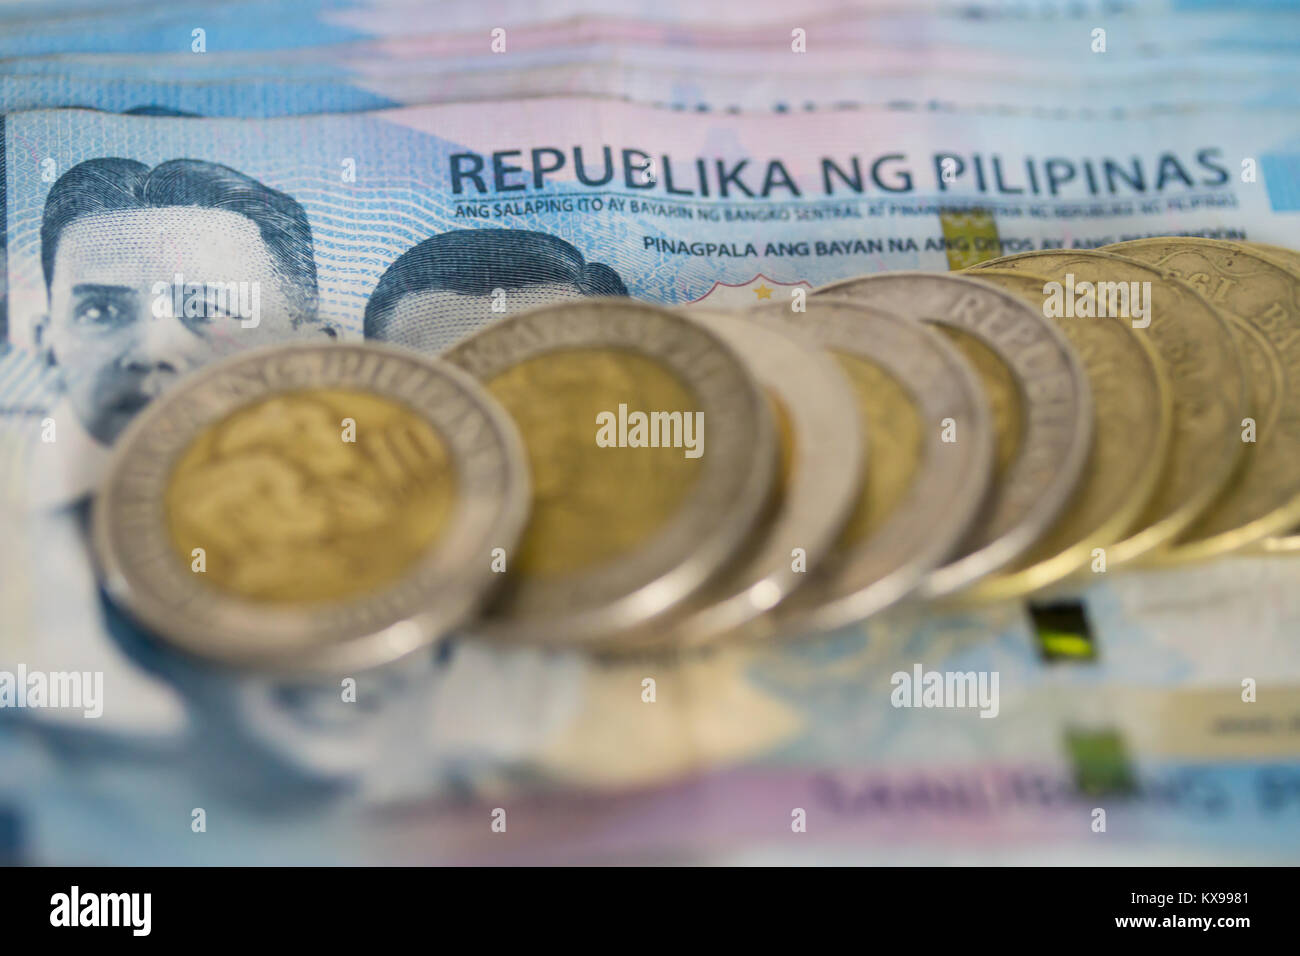 Concept image of Filipino coins and paper money indicating economy of the Philippines Stock Photo